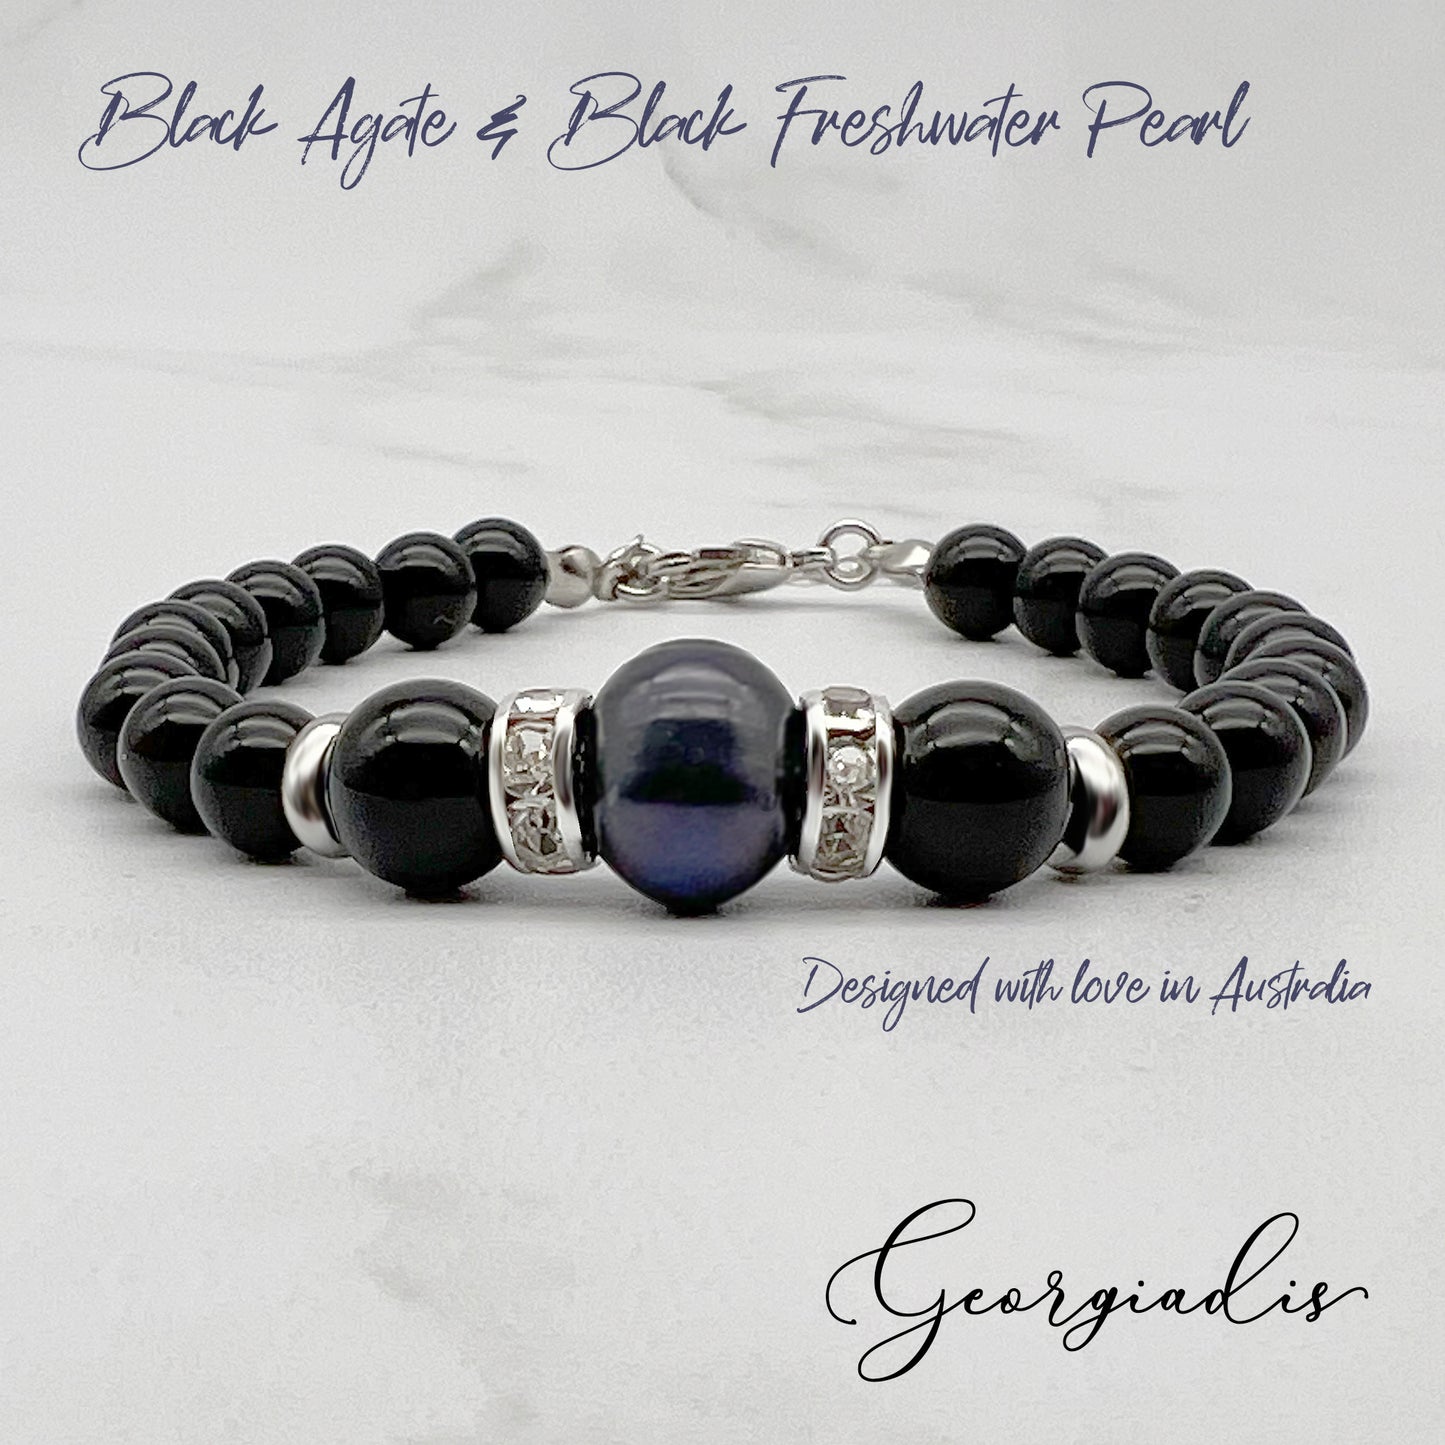 Beautiful Real Black Pearl & Black Agate Gemstone Bracelet, High Luster Grade A Pearl, Platinum Plated with Sparkling Rhinestone Spacers, Strength.